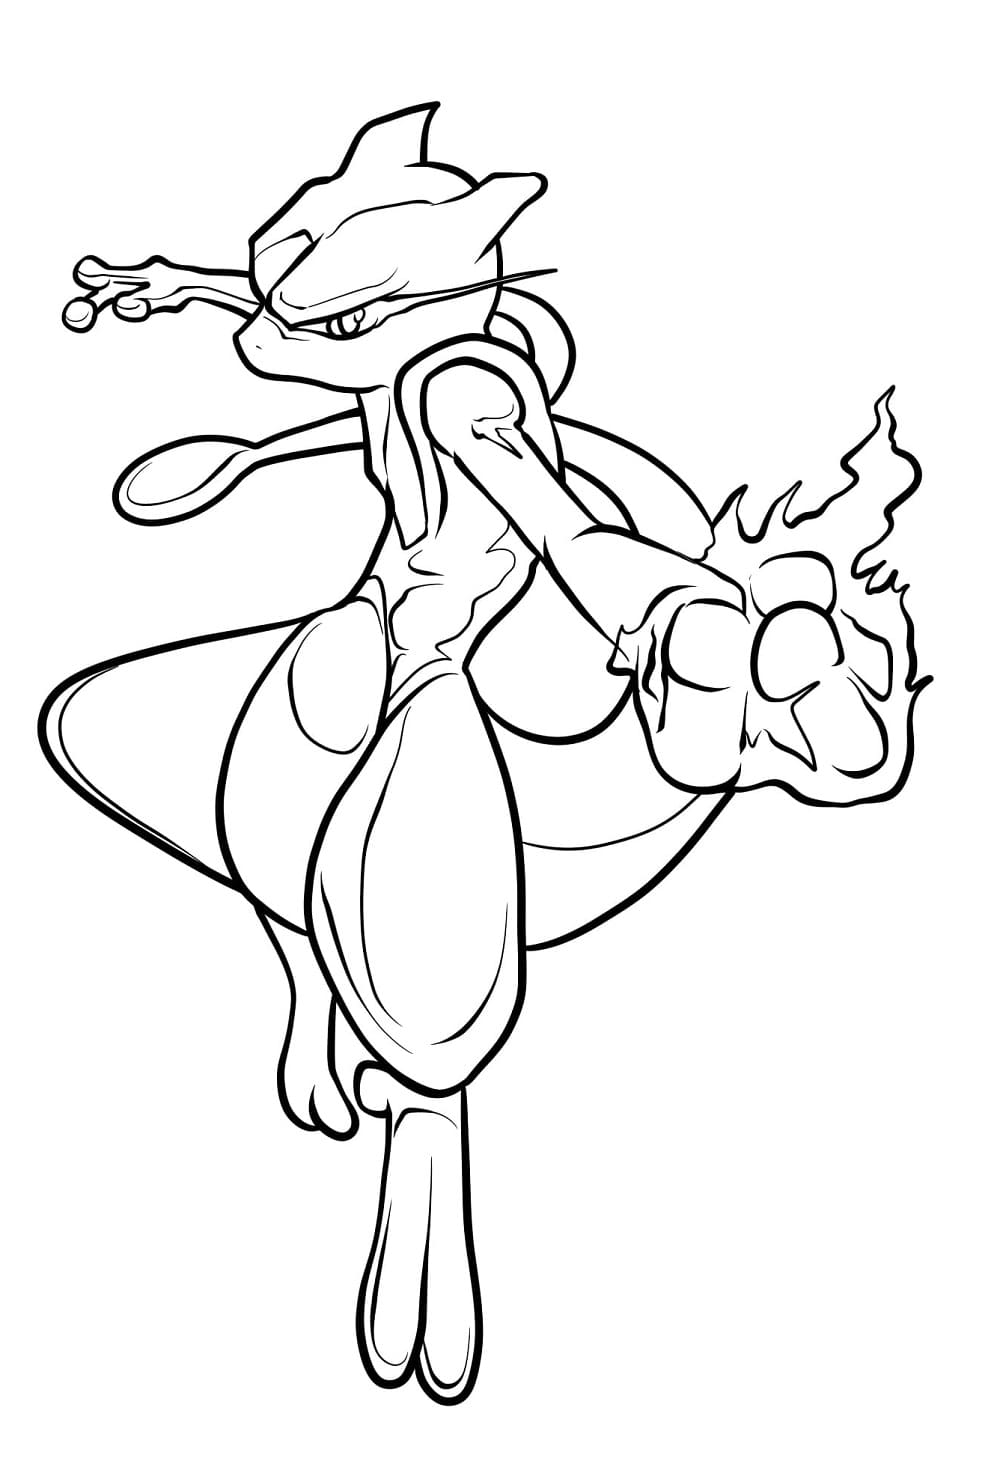 Printable Mewtwo Punch Coloring Page